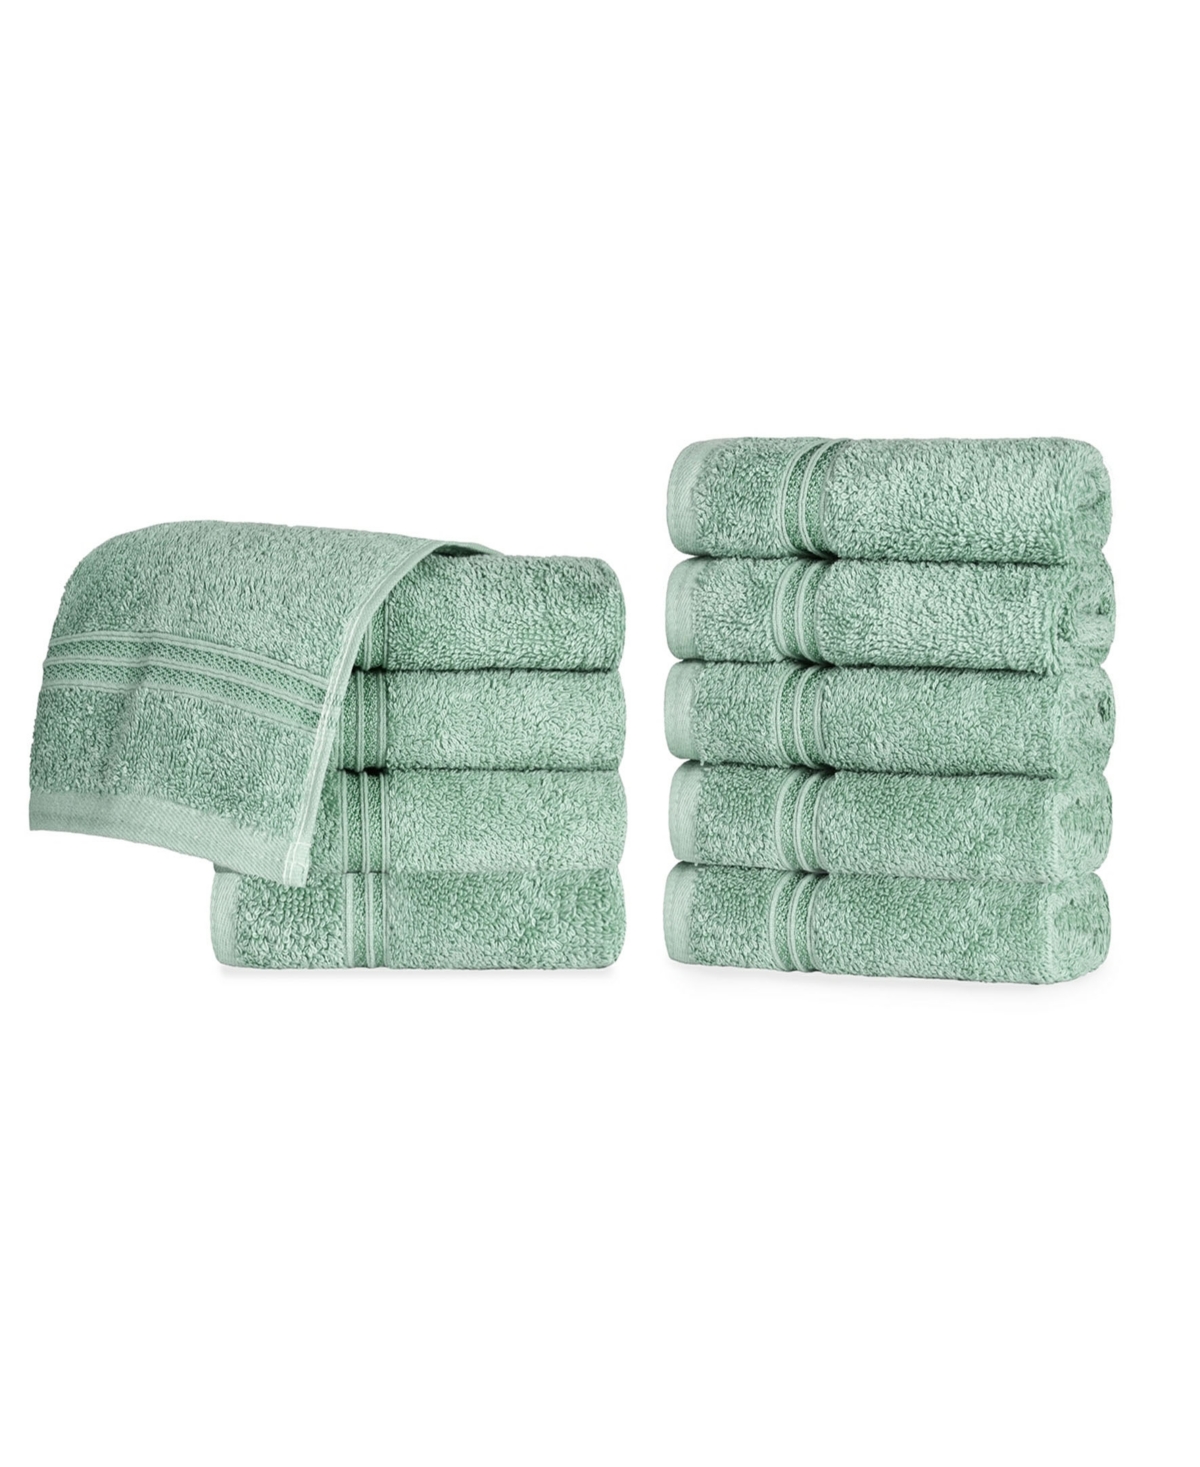 Superior Solid Quick Drying Absorbent 10 Piece Egyptian Cotton Face Towel Set Bedding In Sage